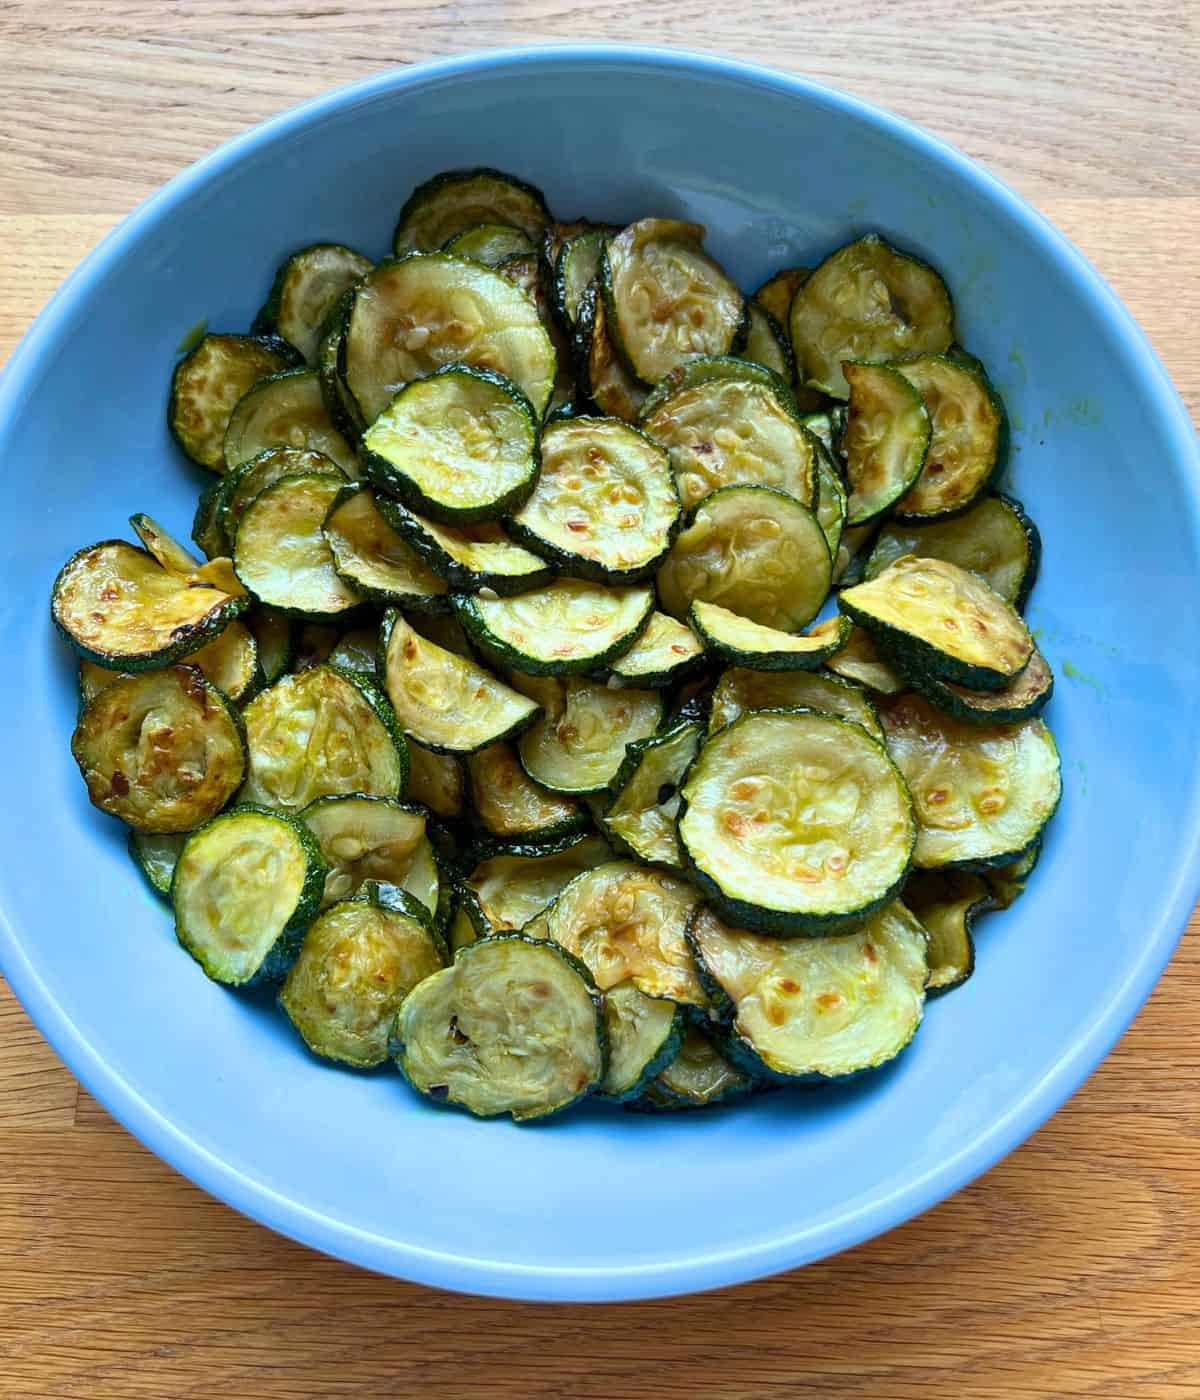 Fried slices of zucchini in a blue bowl.